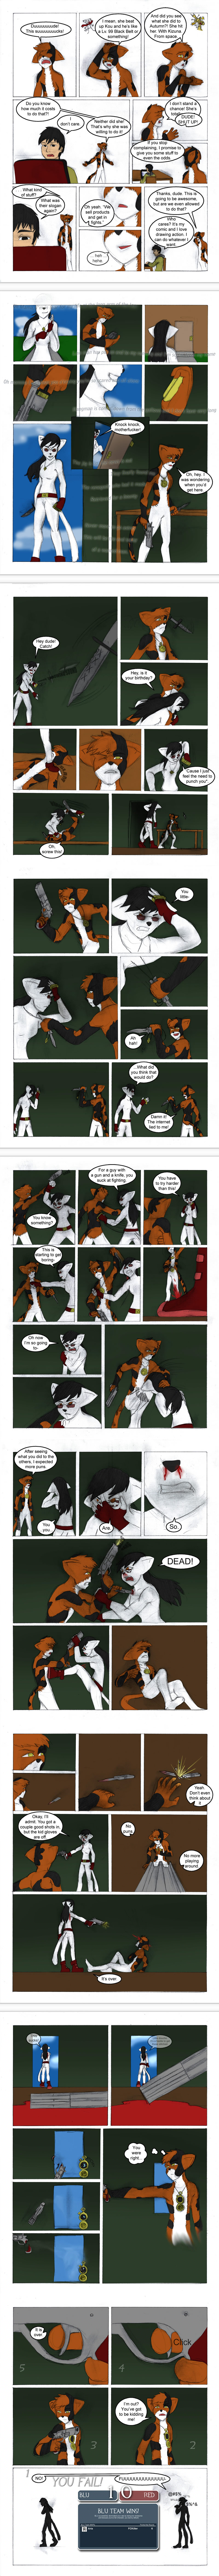 Candybooru image #2992, tagged with Aria Dancing-sword_(Artist) Holden Kou blood comic fankiller weapon